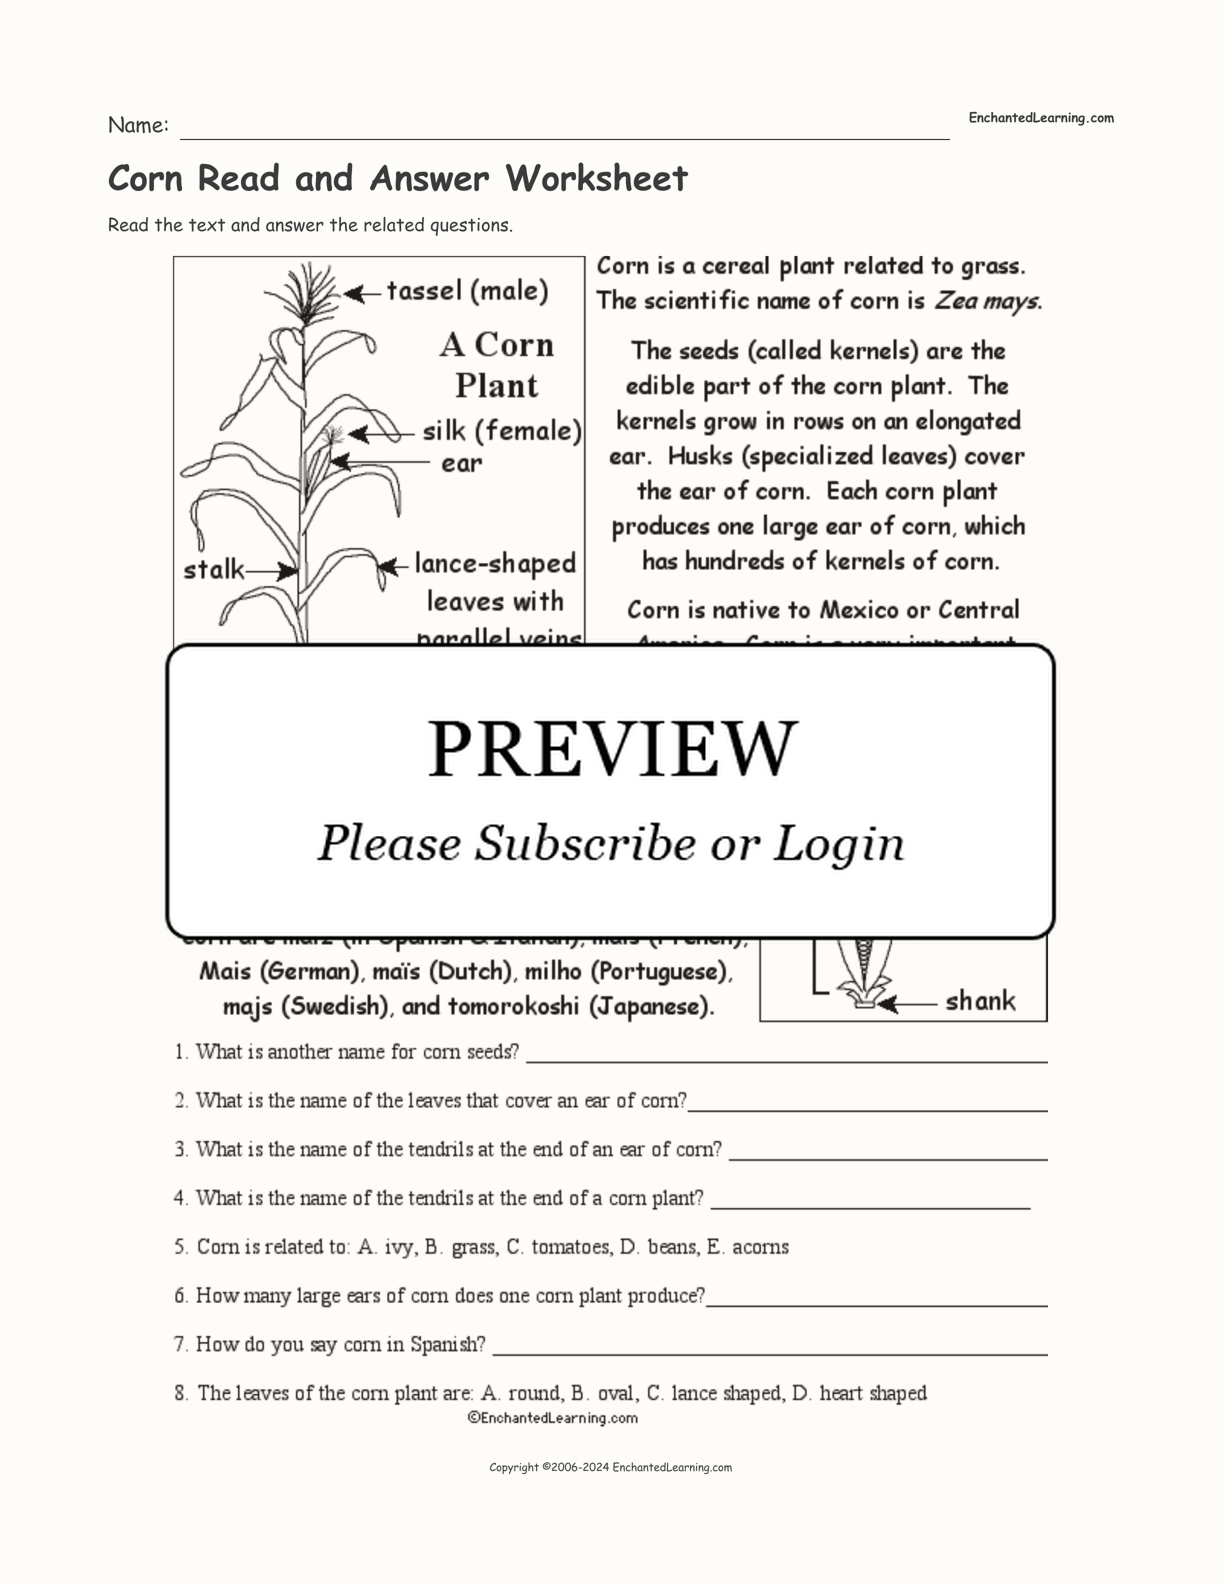 Corn Read and Answer Worksheet interactive worksheet page 1